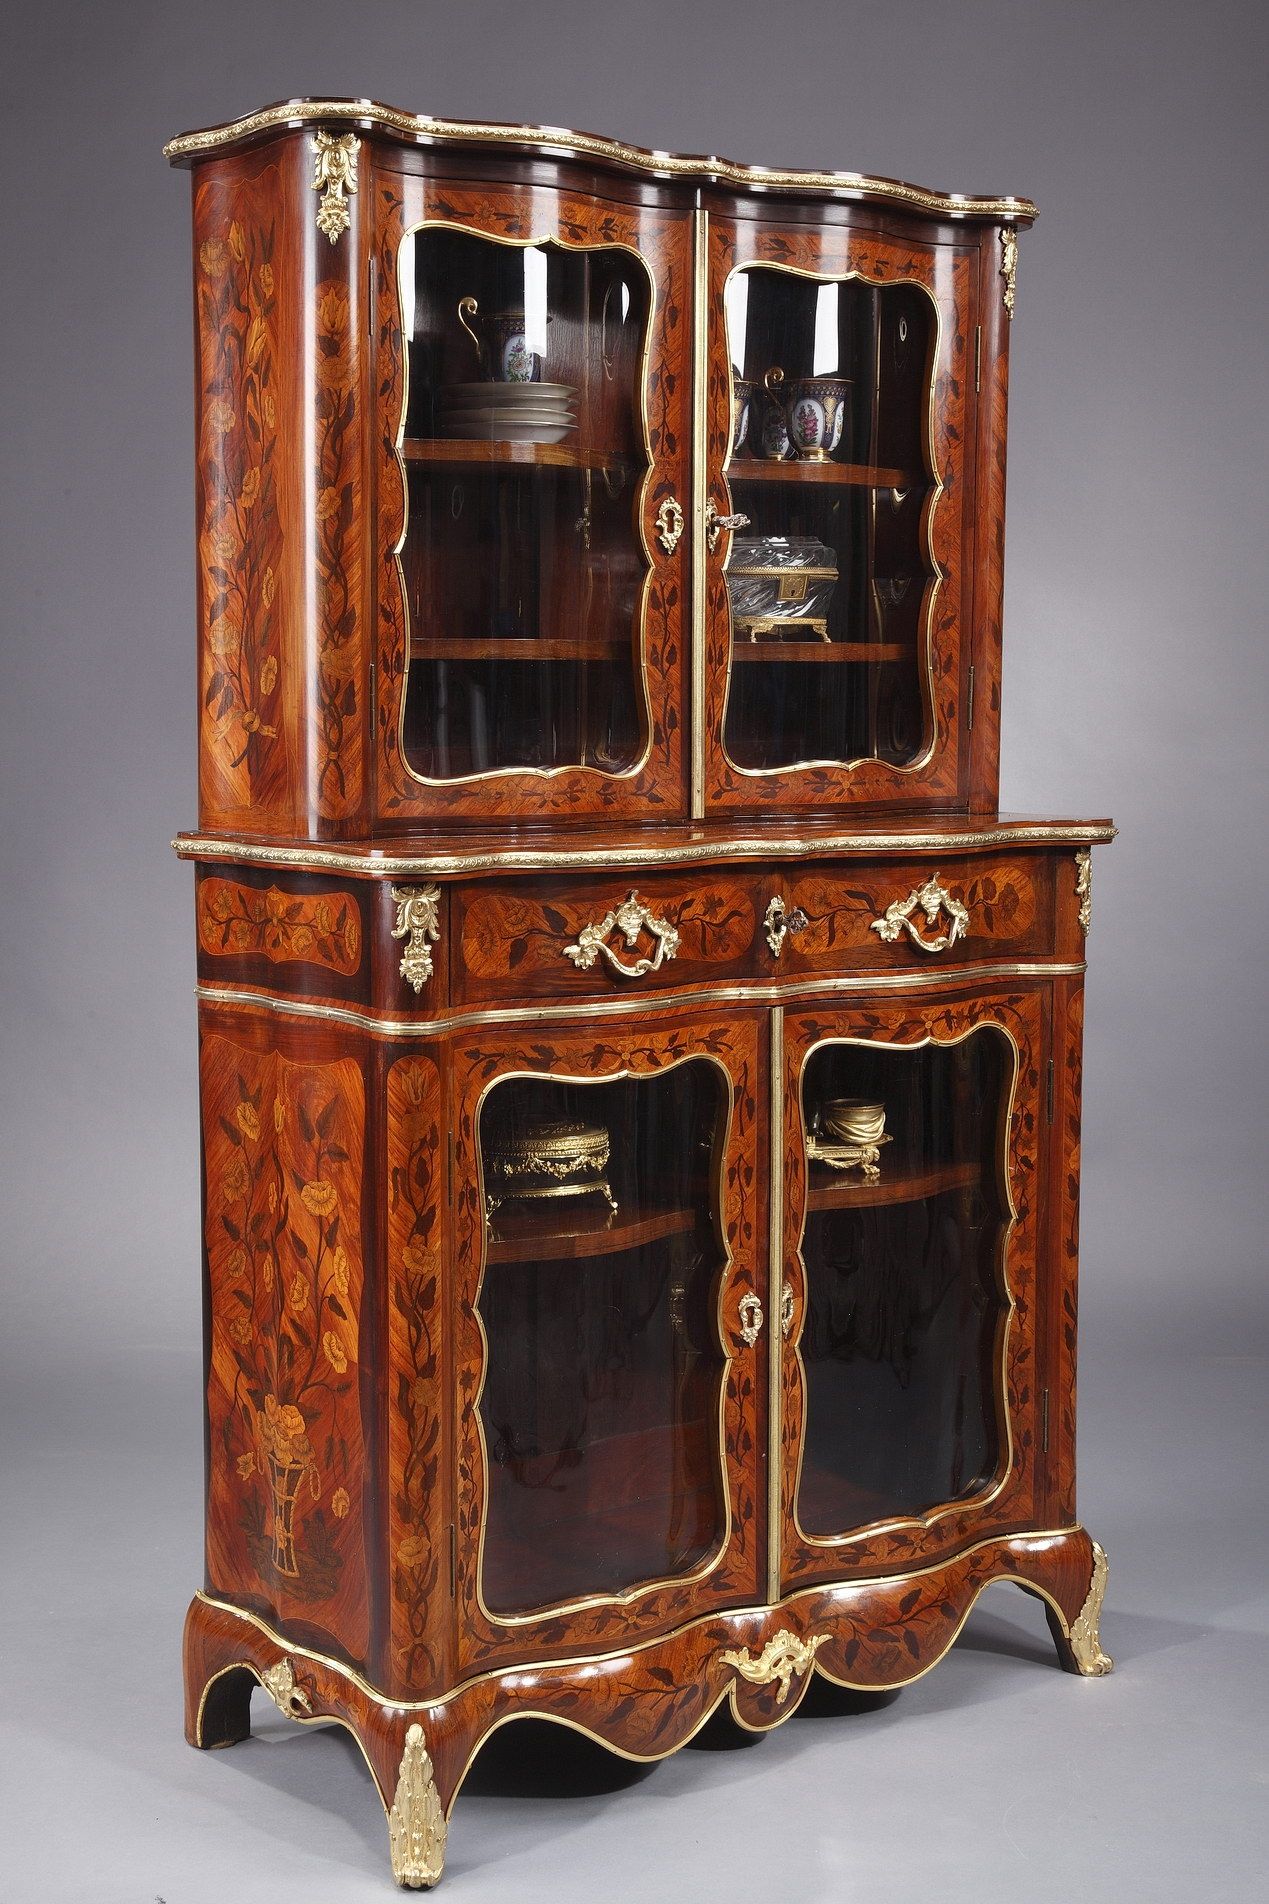 LOUIS XV STYLE DISPLAY CABINET WITH MARQUETRY DECORATION, 19TH CENTURY